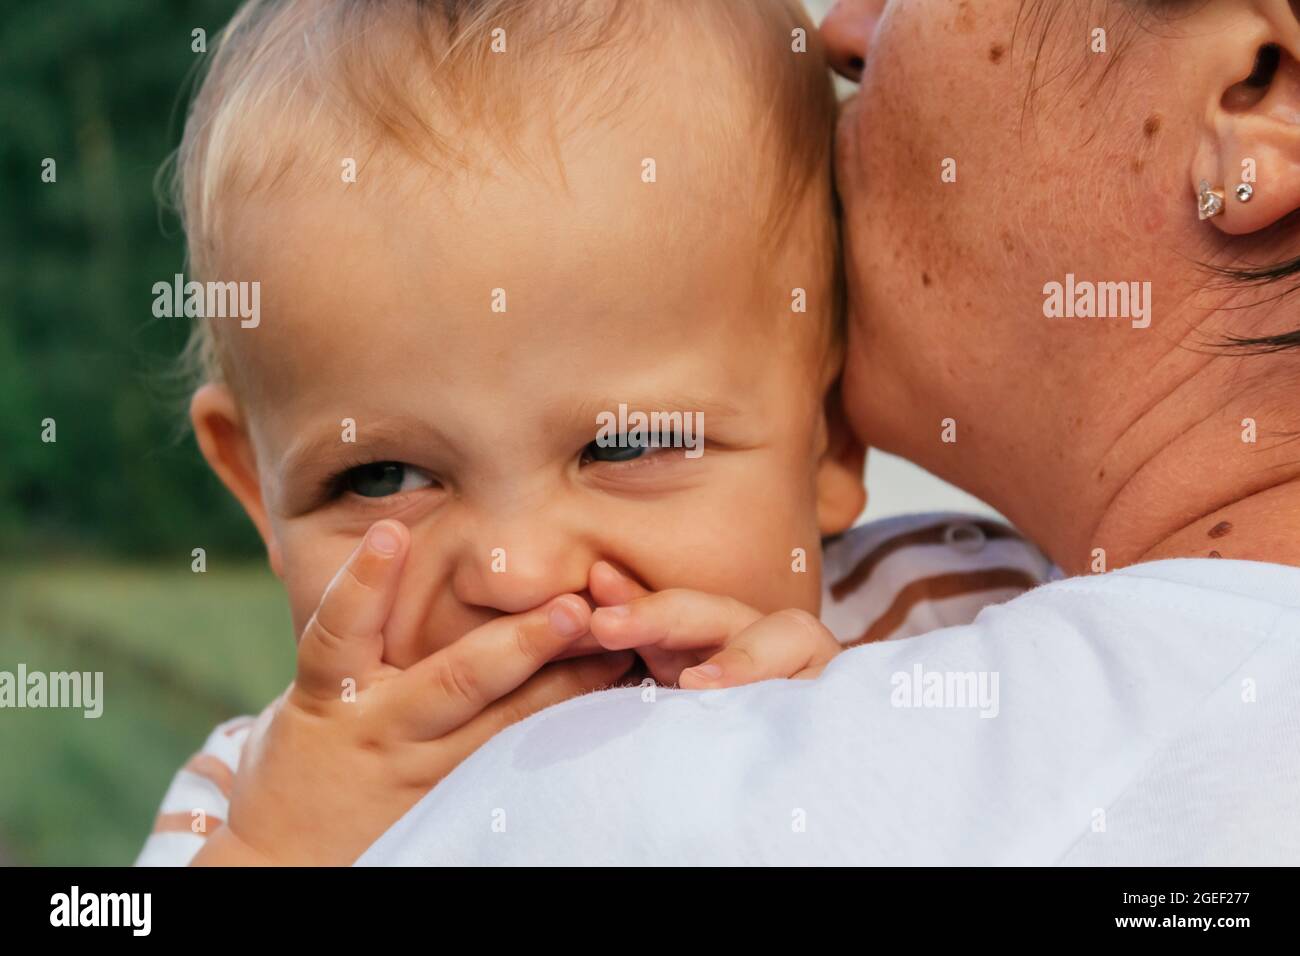 Little boy looks over his mother's shoulder. Stock Photo